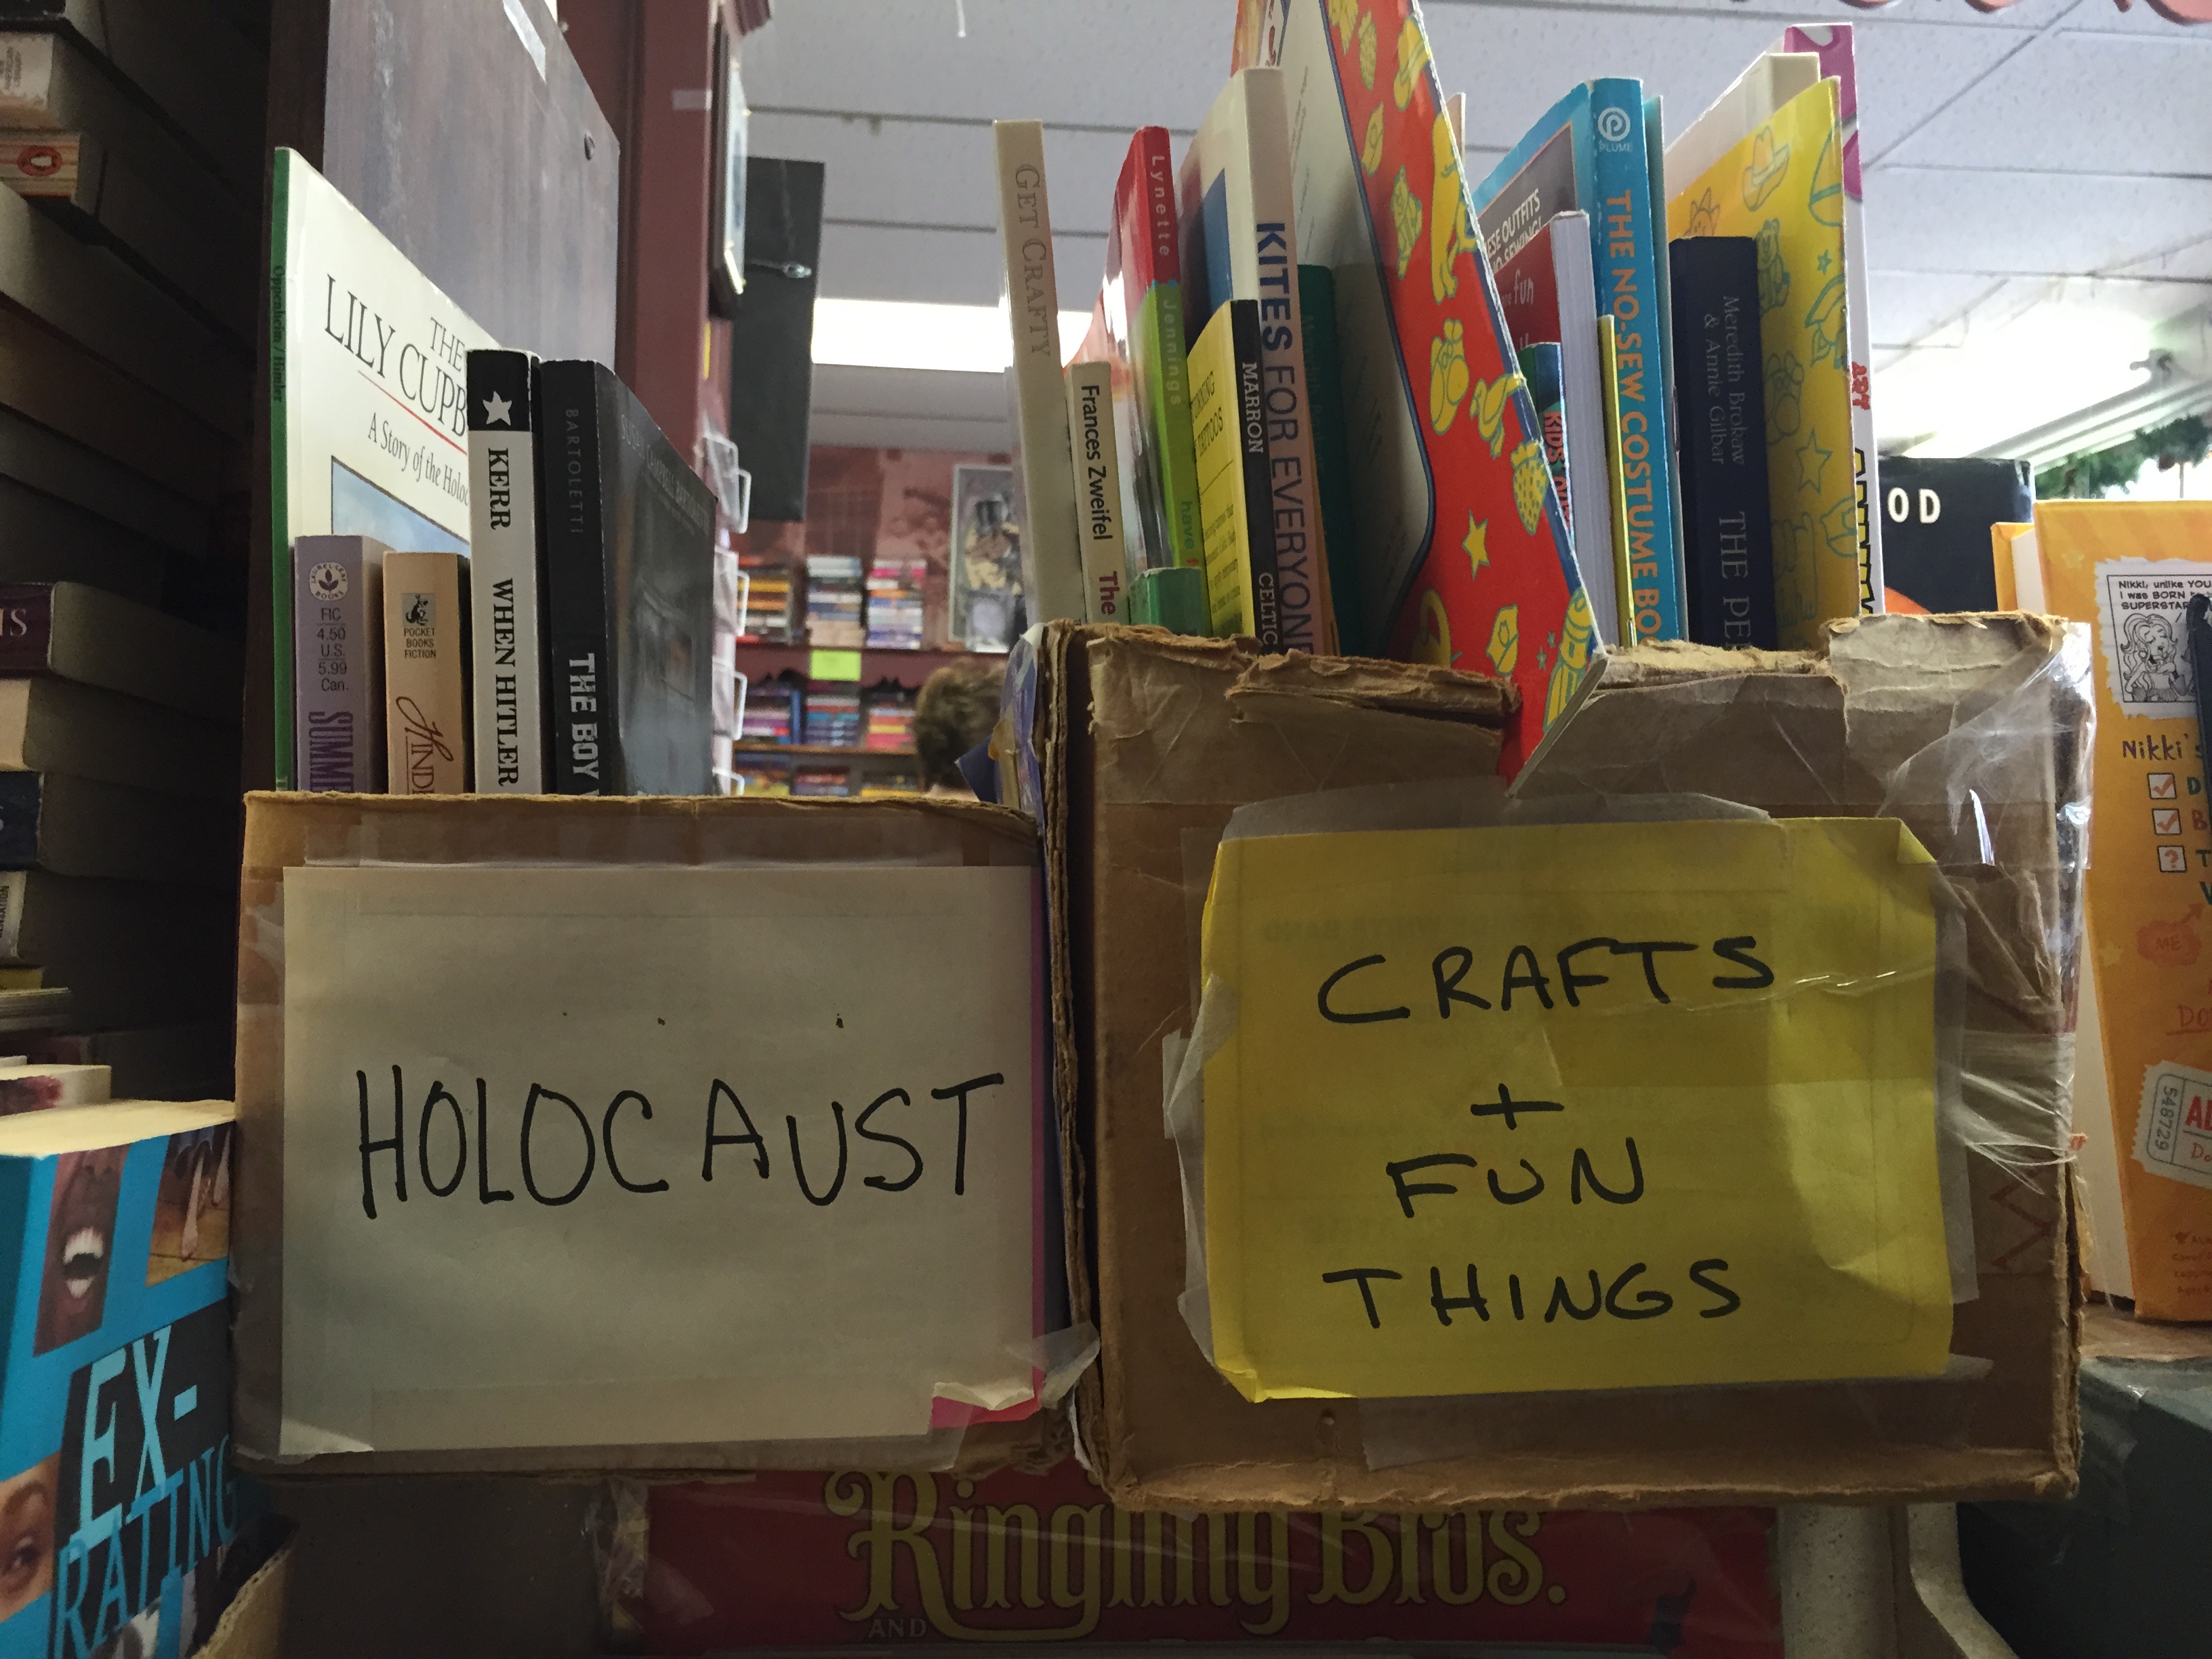 21 Examples Of Bookstore Employees Having Too Much Fun